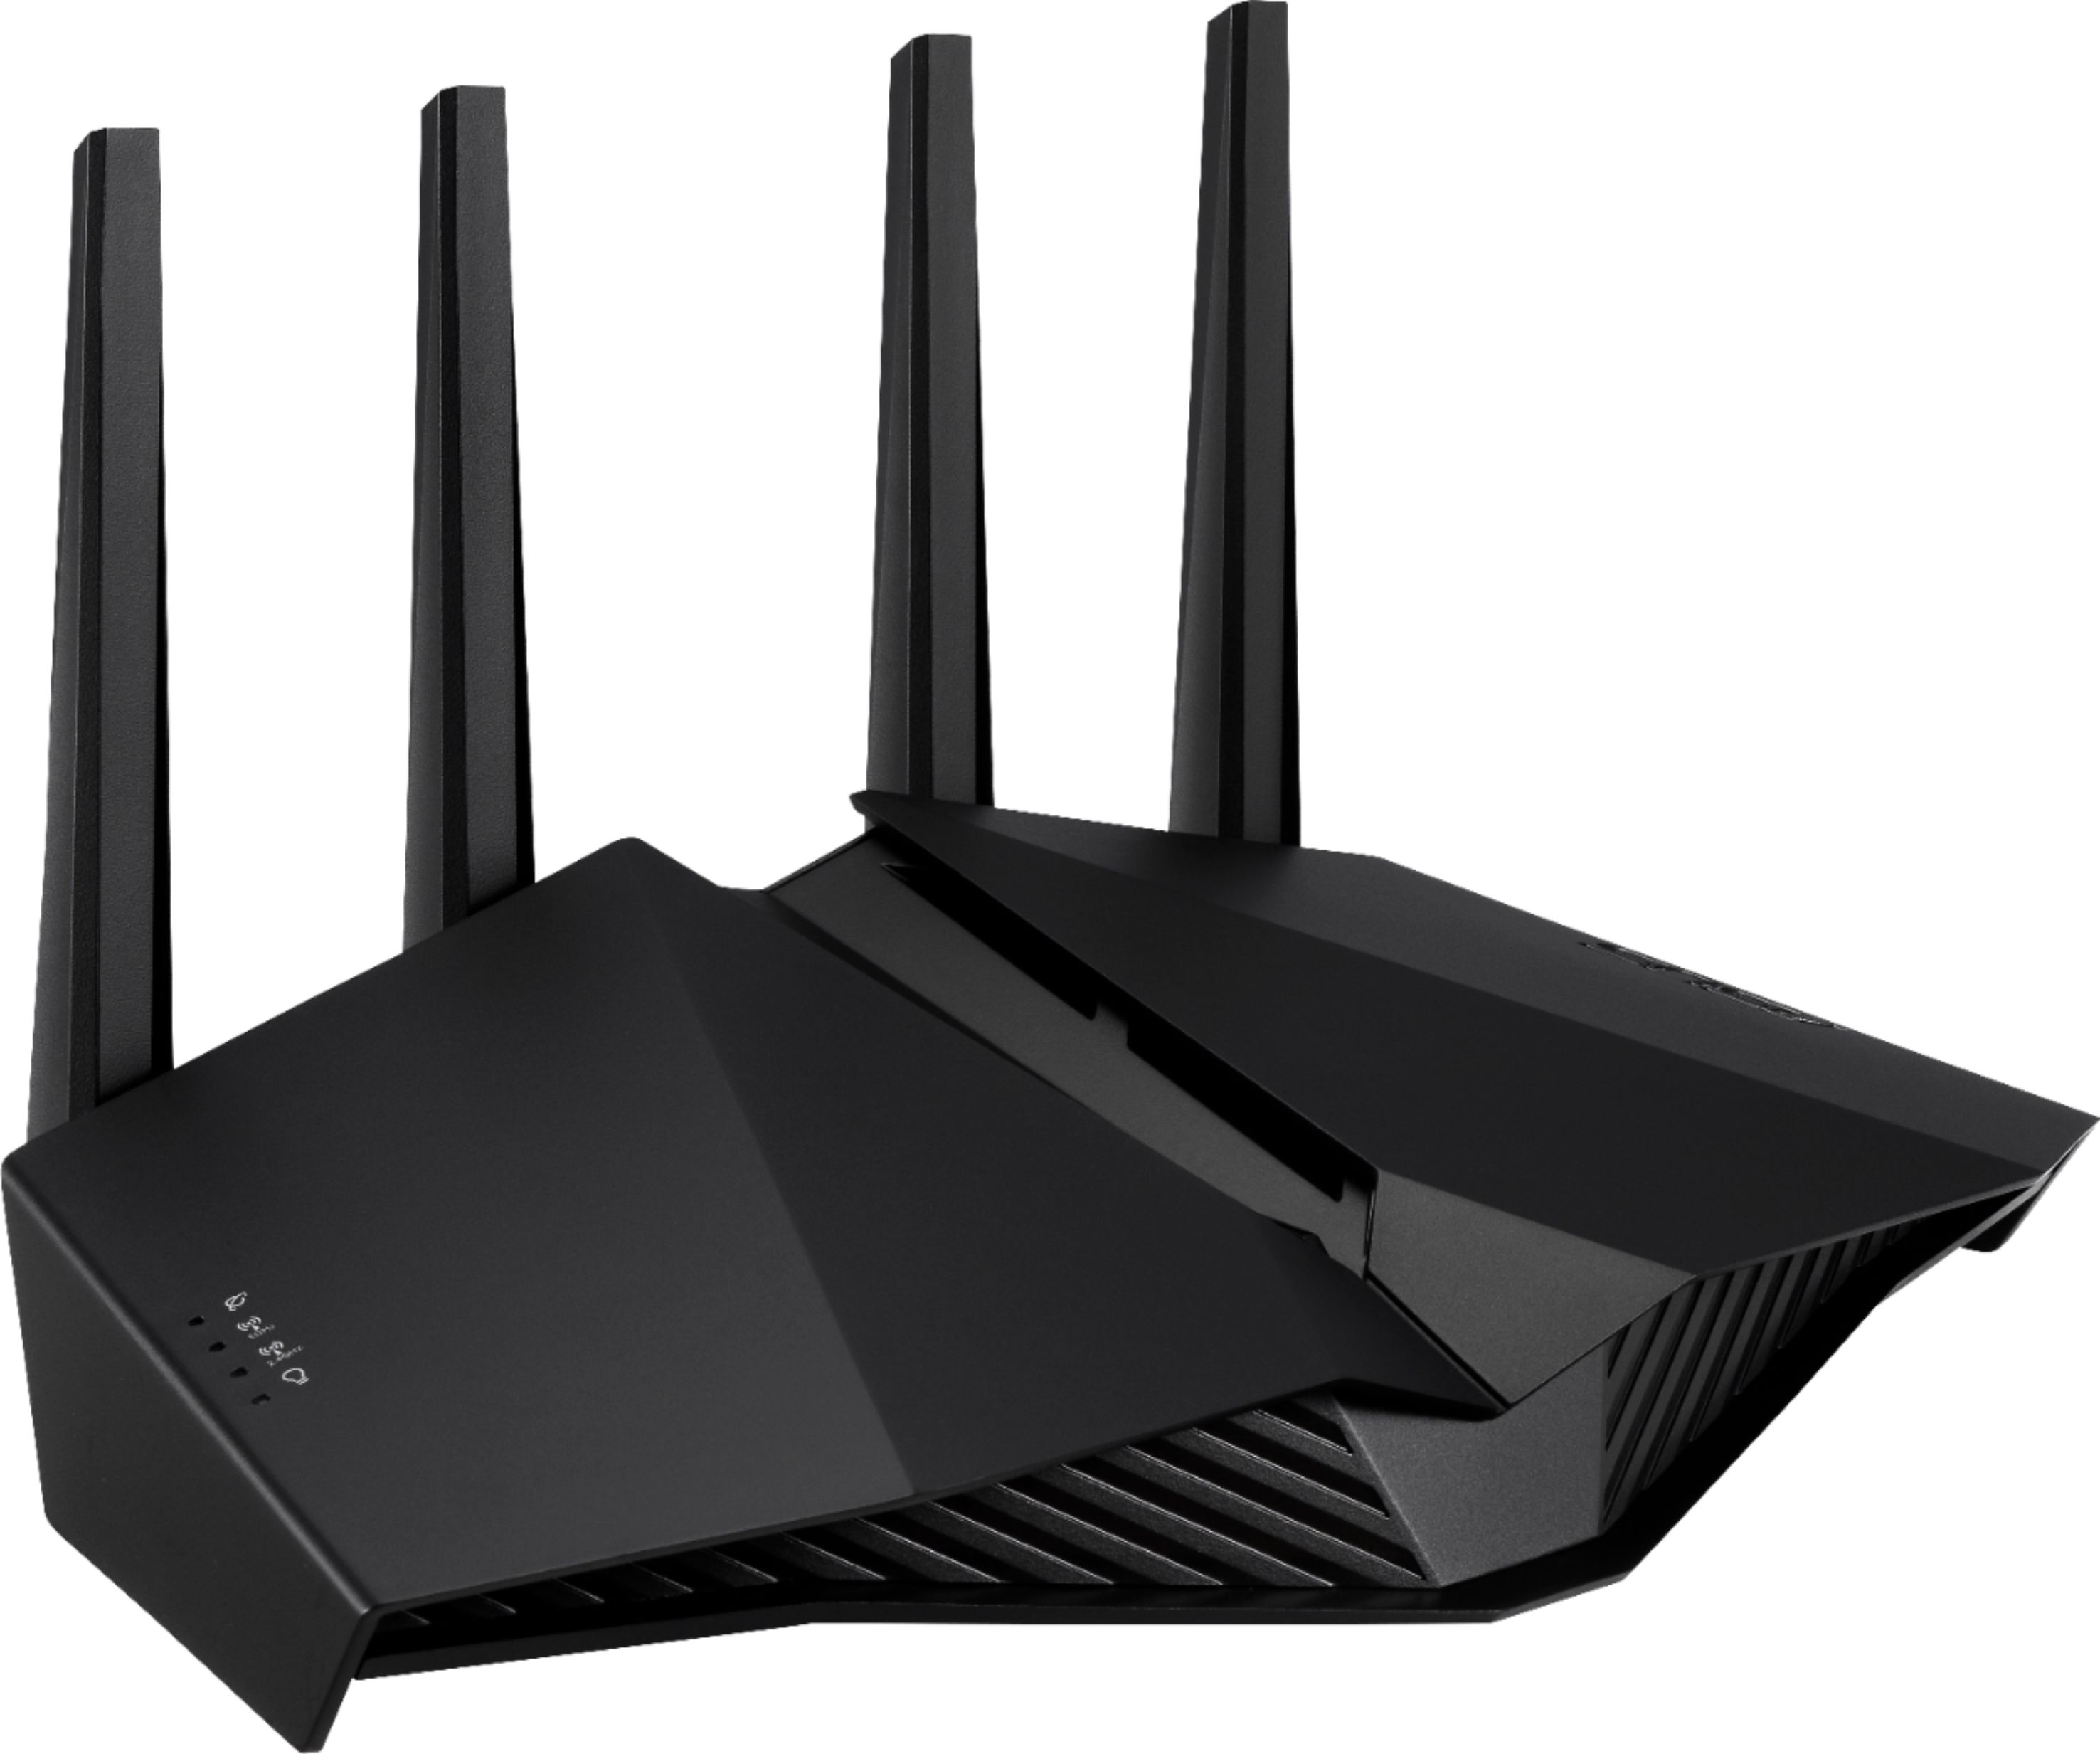 Angle View: ASUS - Wireless Router - Black